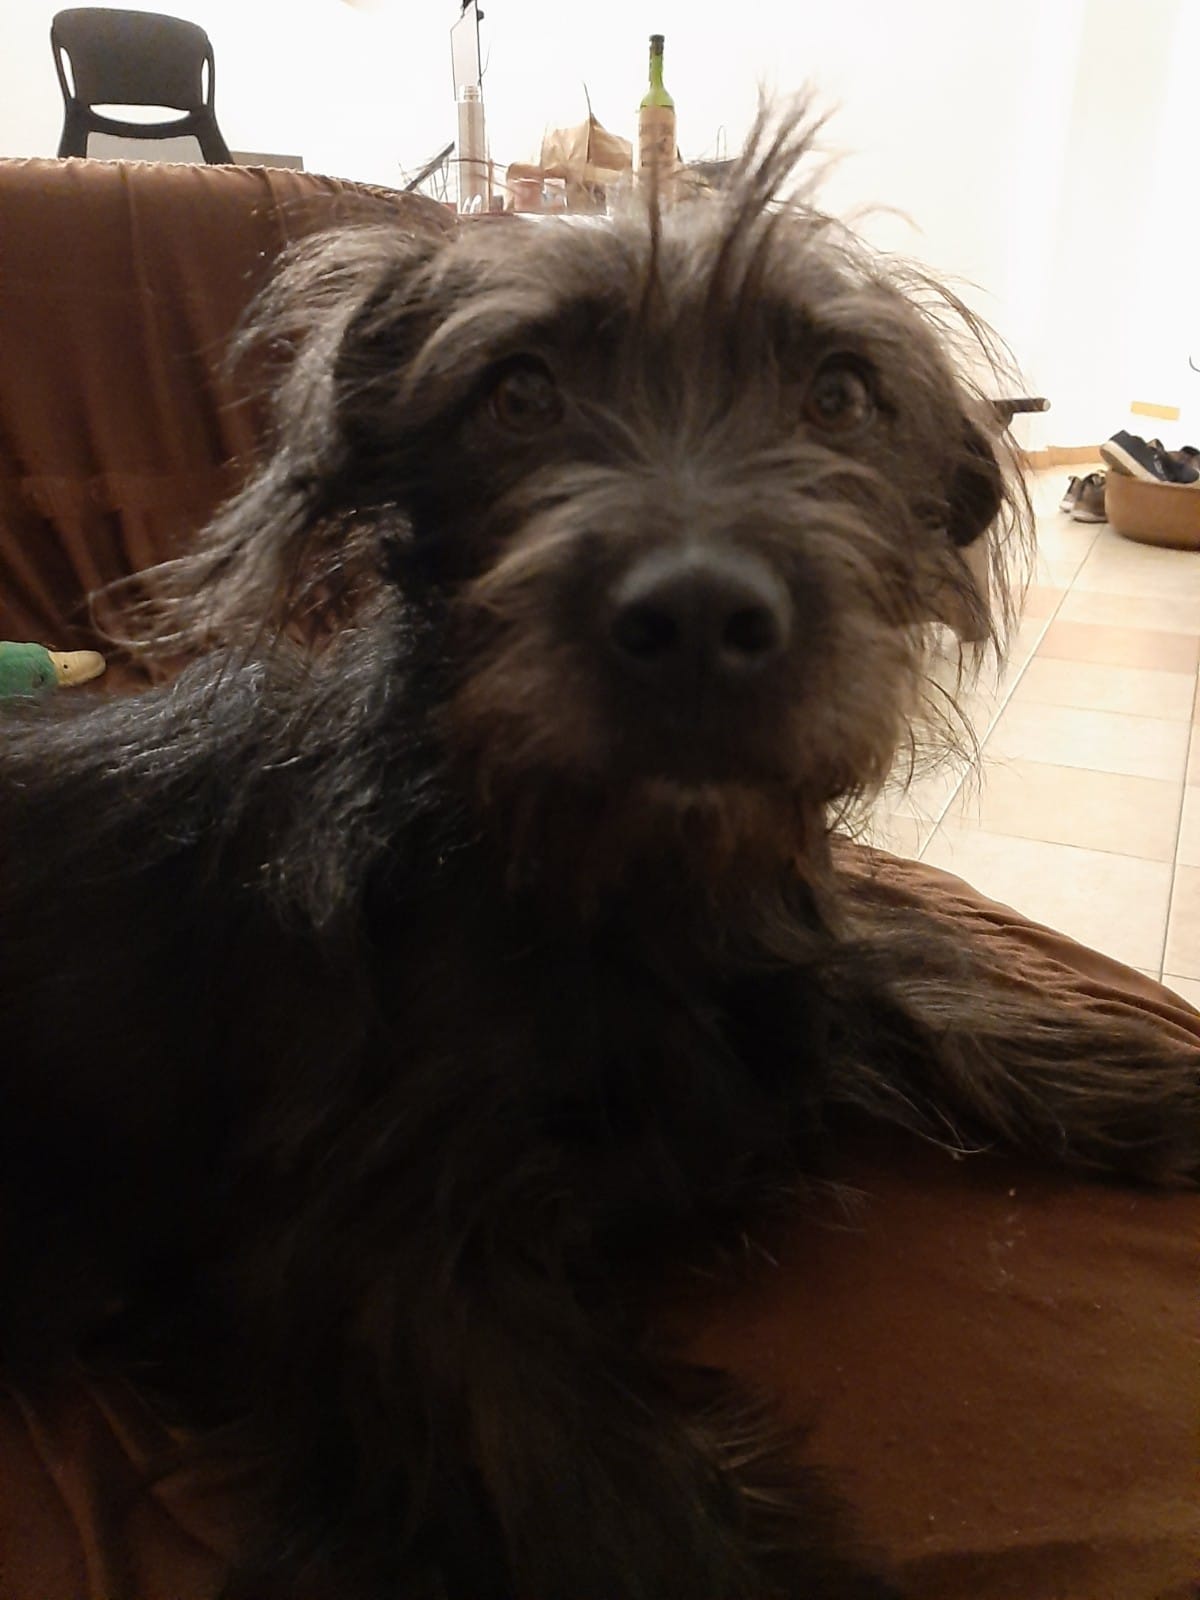 Winnie, my small dog with black, long hair, looks at the camera as she sits on our couch.